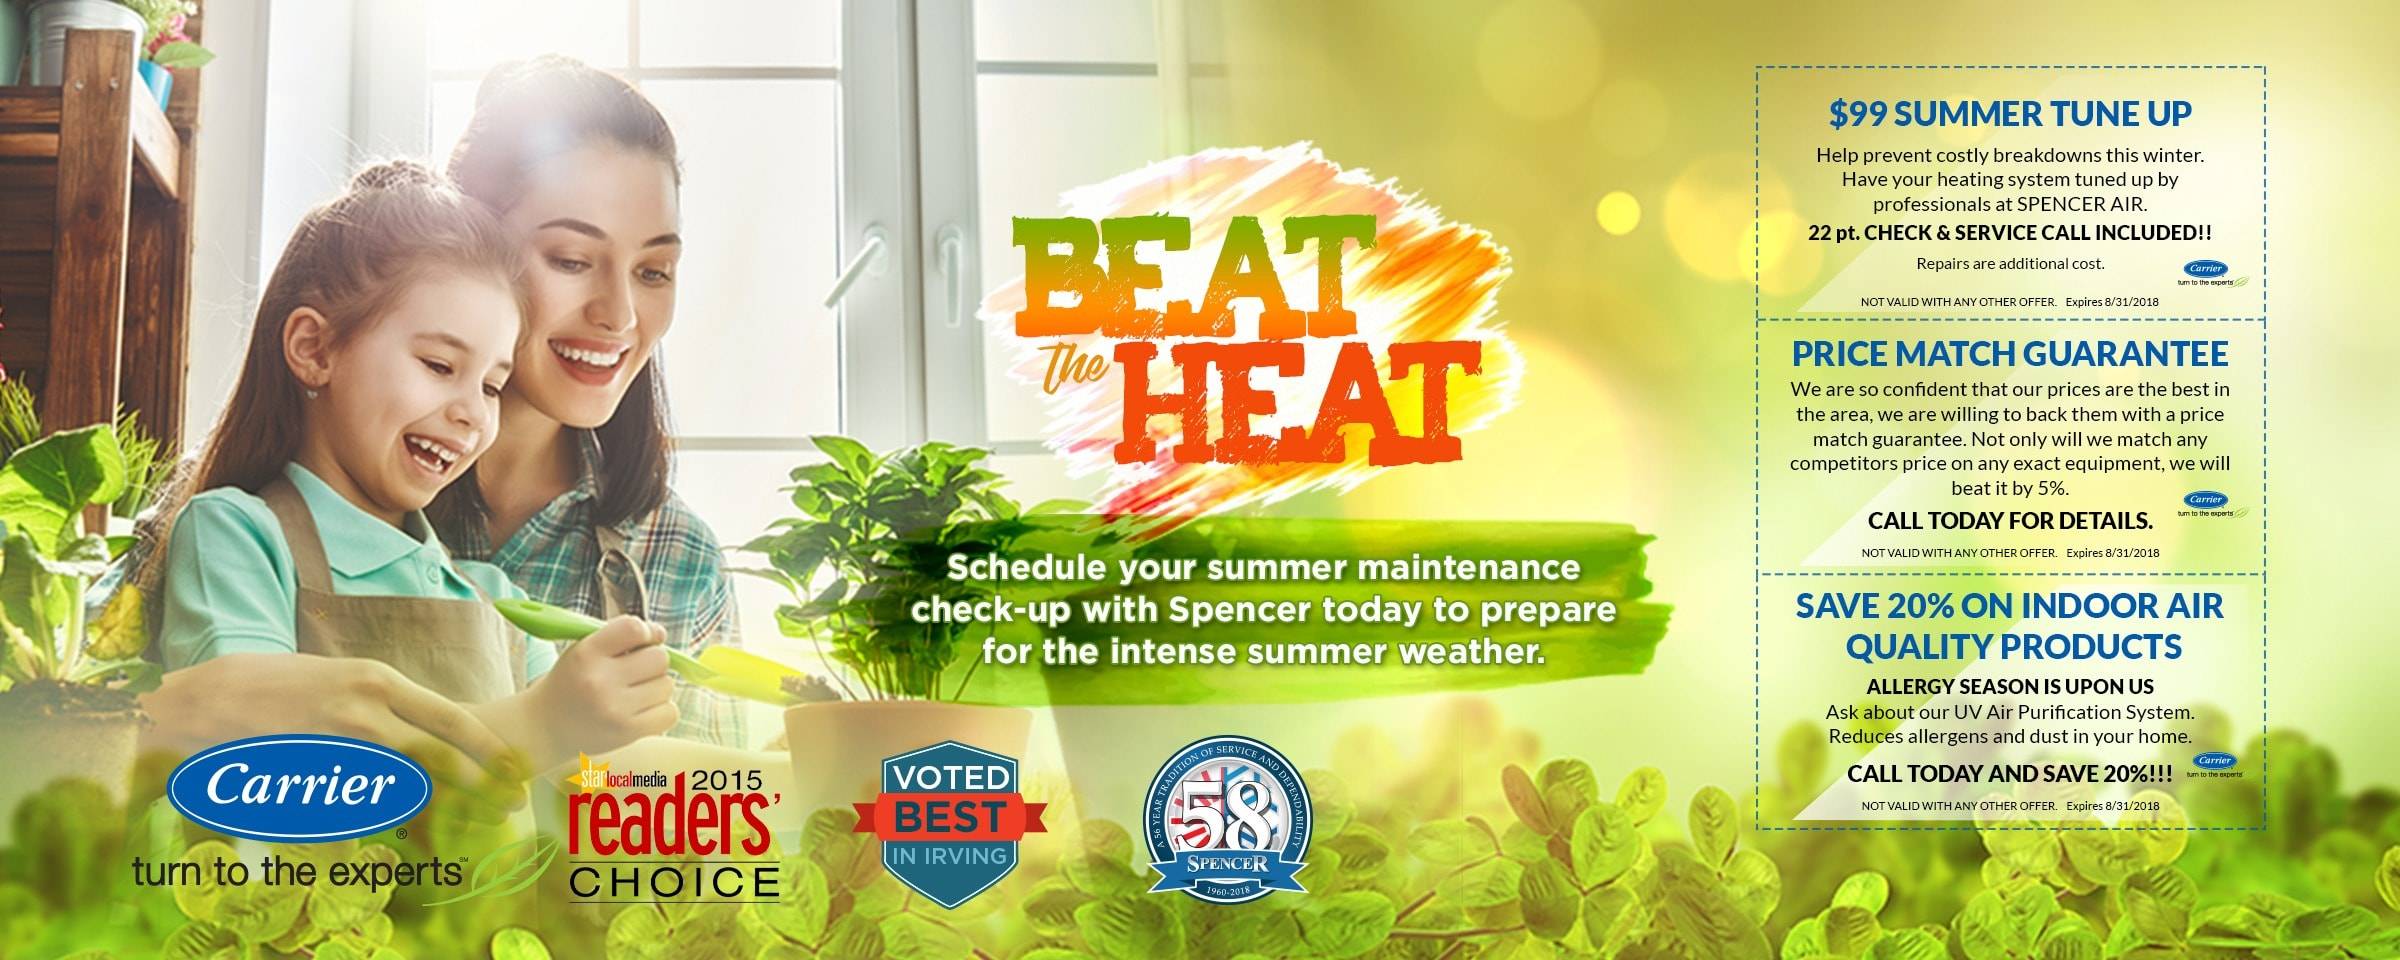 beat the heat schedule your summer maintenance check-up with spencr today to prepare for the intense summer weather